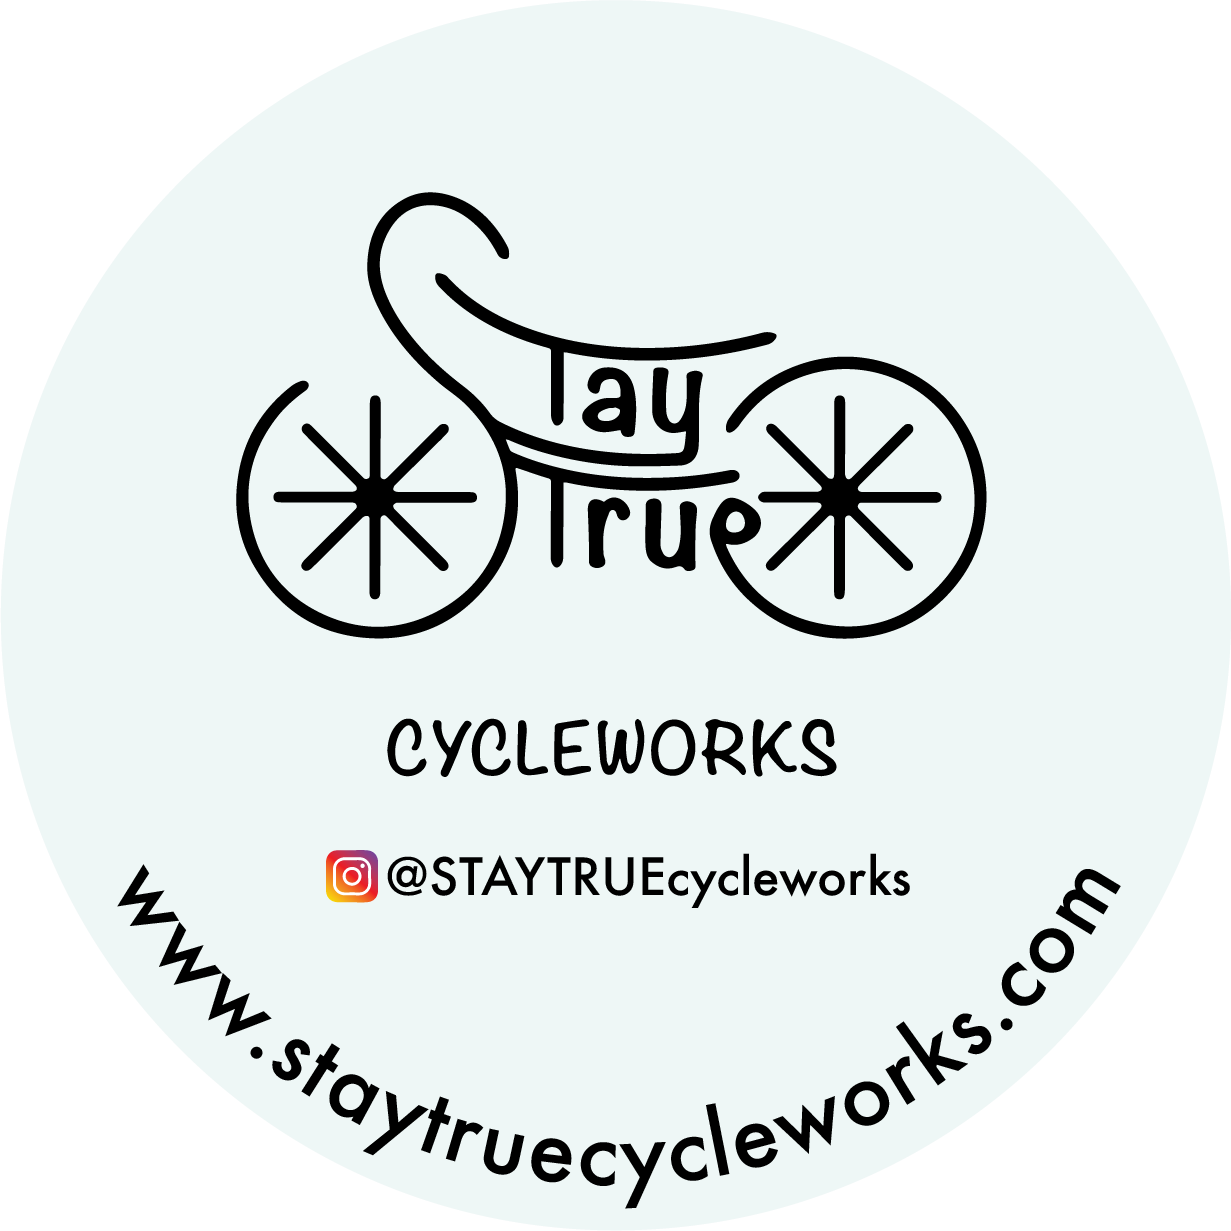 https://www.pedalaheadsd.org/wp-content/uploads/2022/11/Stay-True-Cycleworks-LOGO-VECTOR_1641491820.png